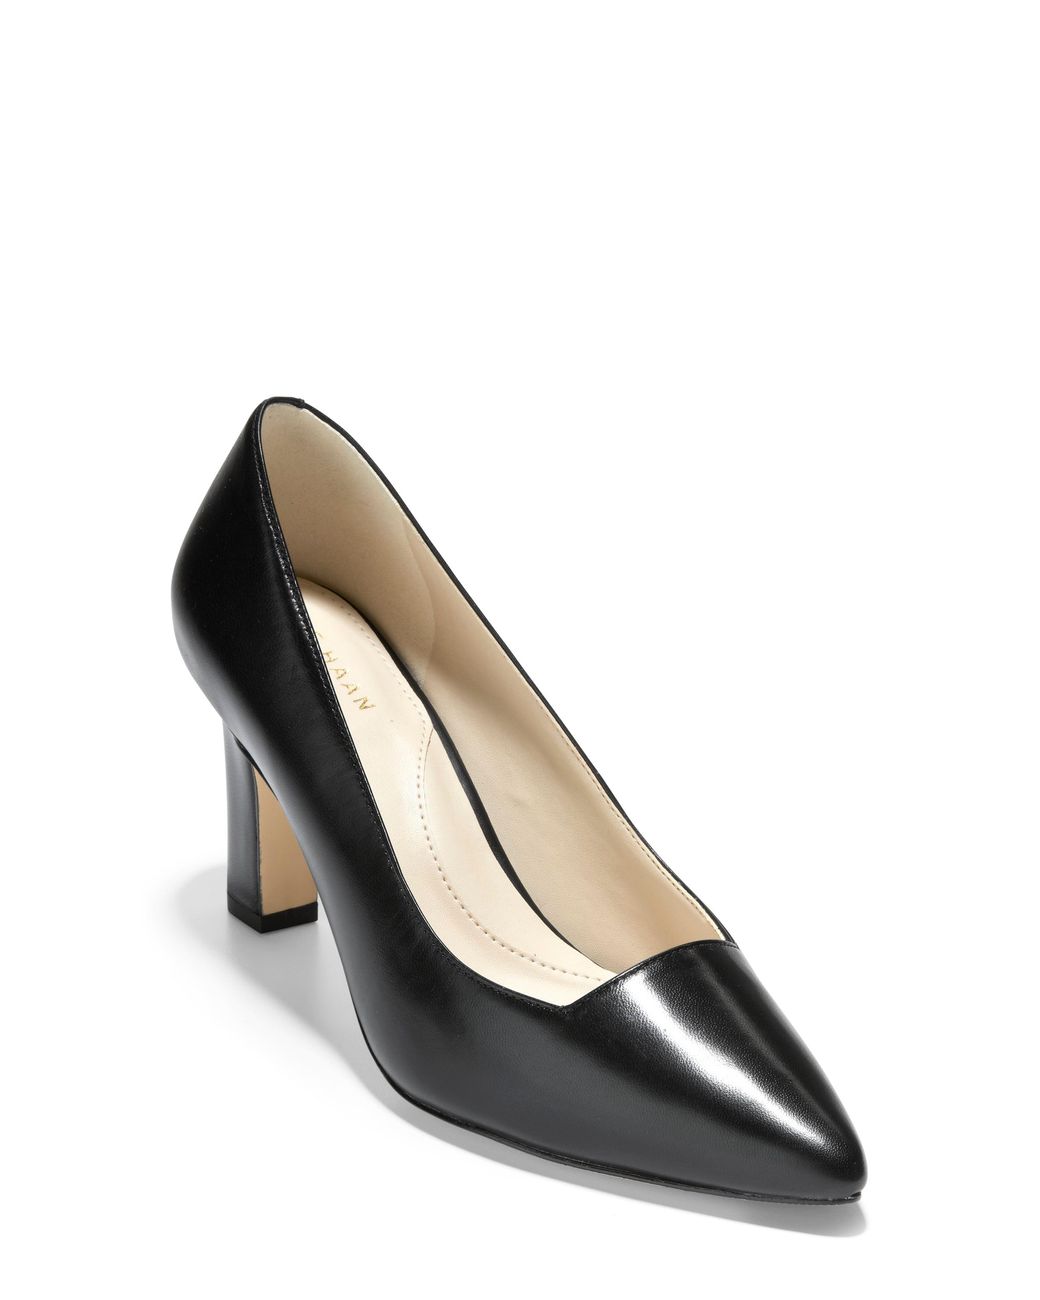 Cole Haan Modern Classics Pump in Black Leather (Black) - Lyst